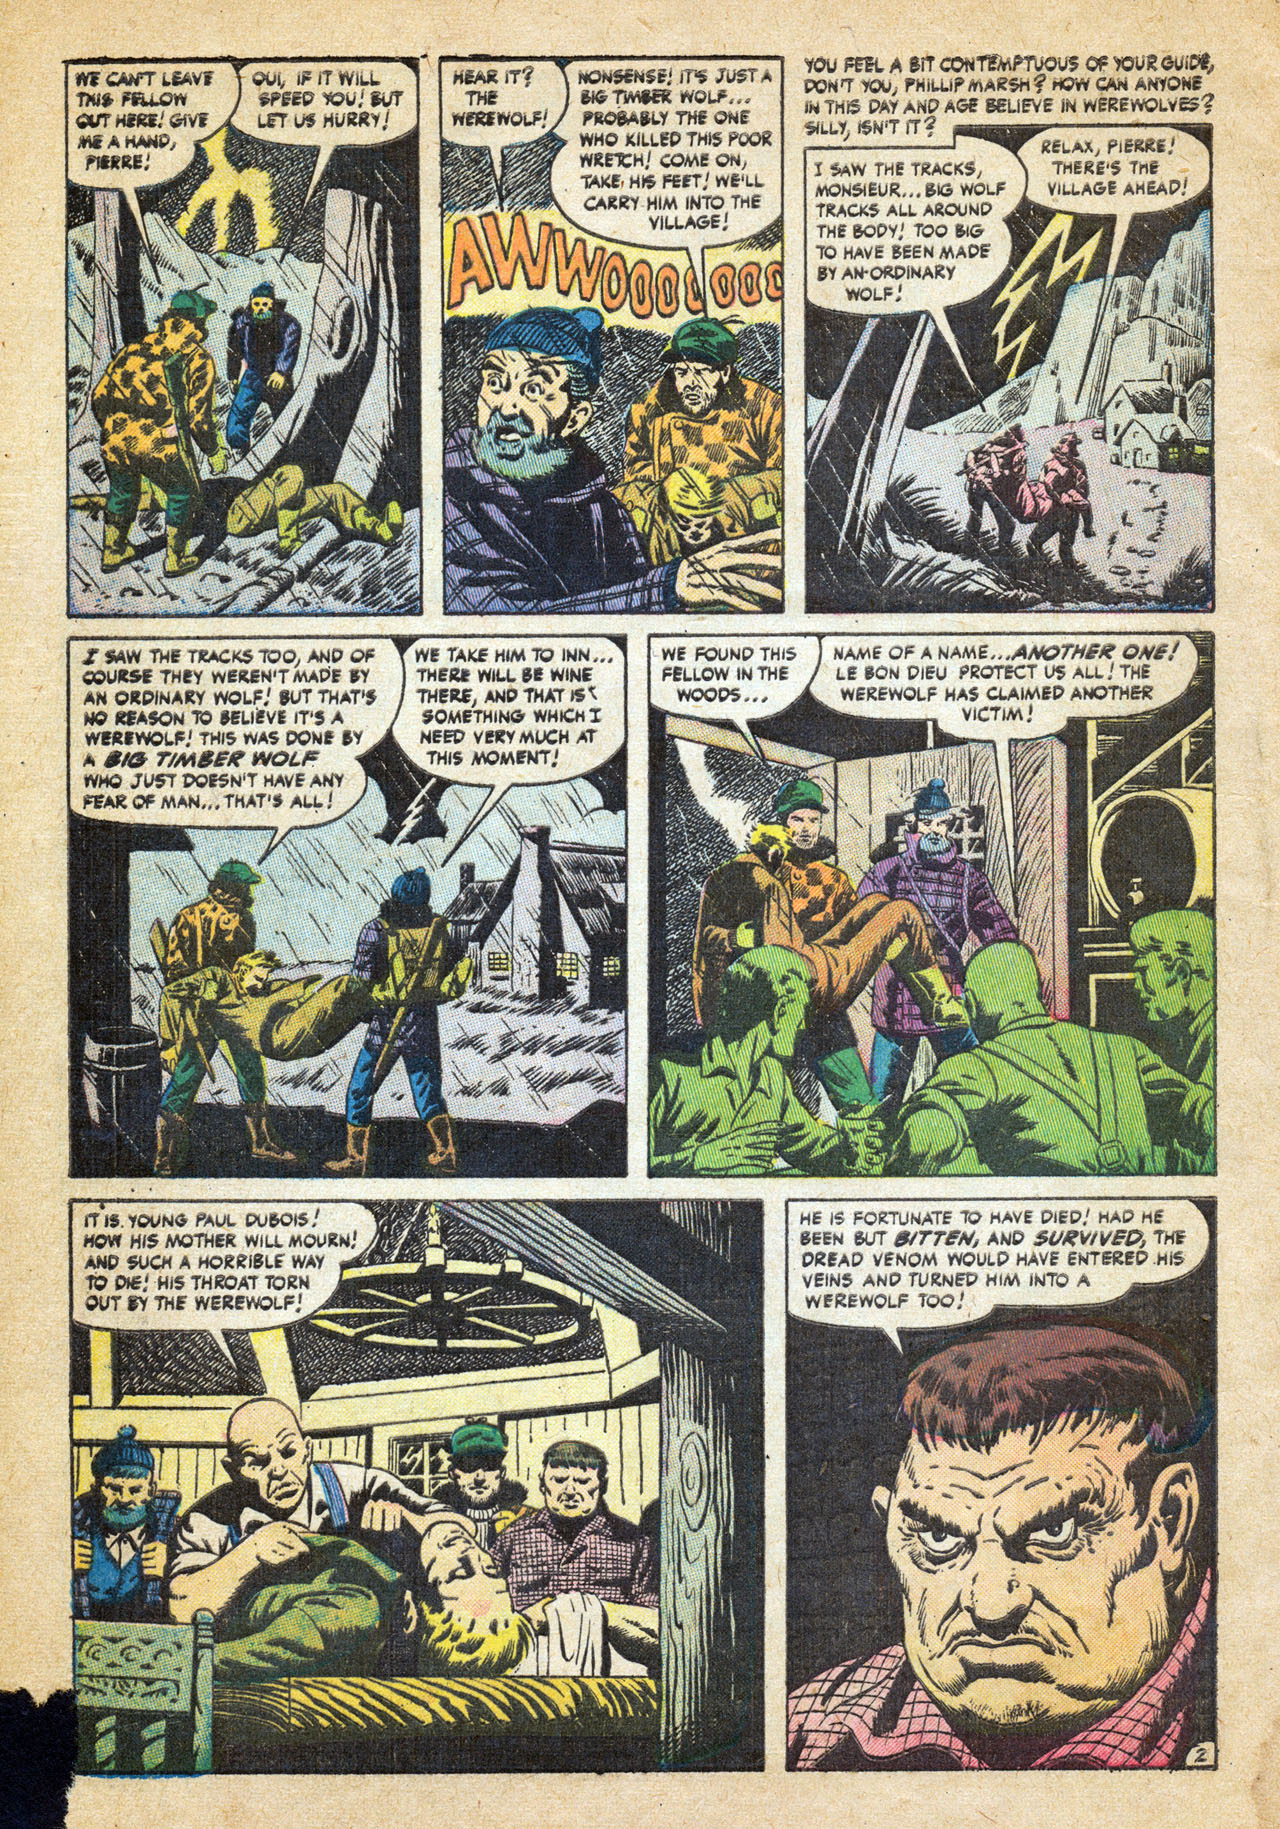 Marvel Tales (1949) 117 Page 3